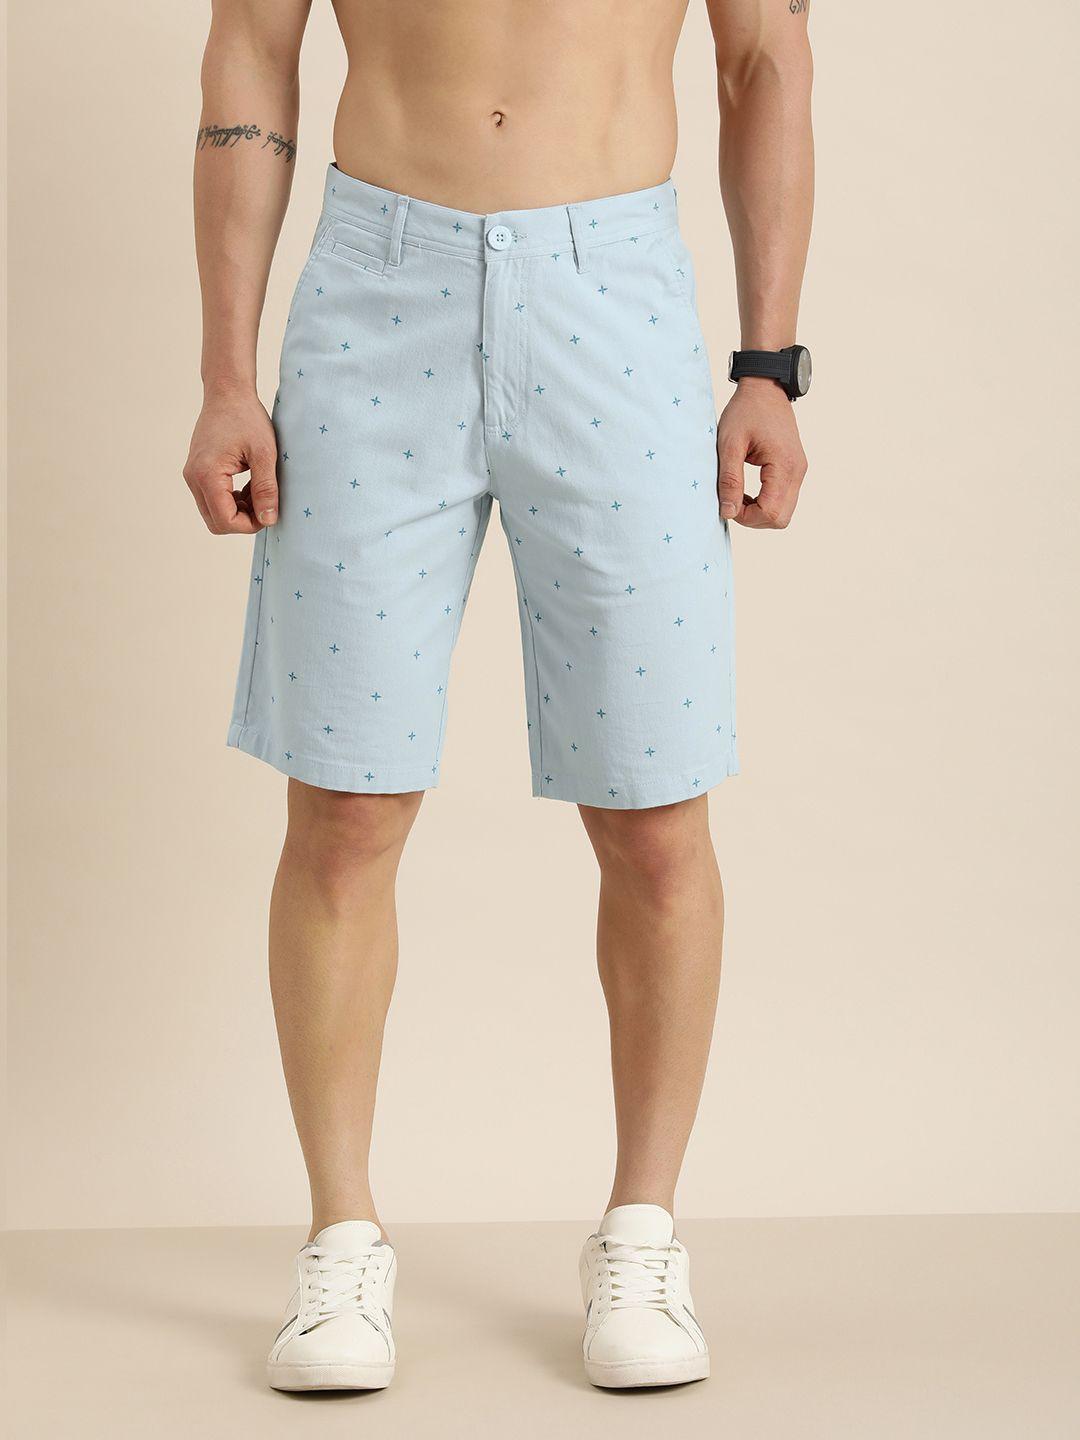 here&now men abstract printed slim fit shorts